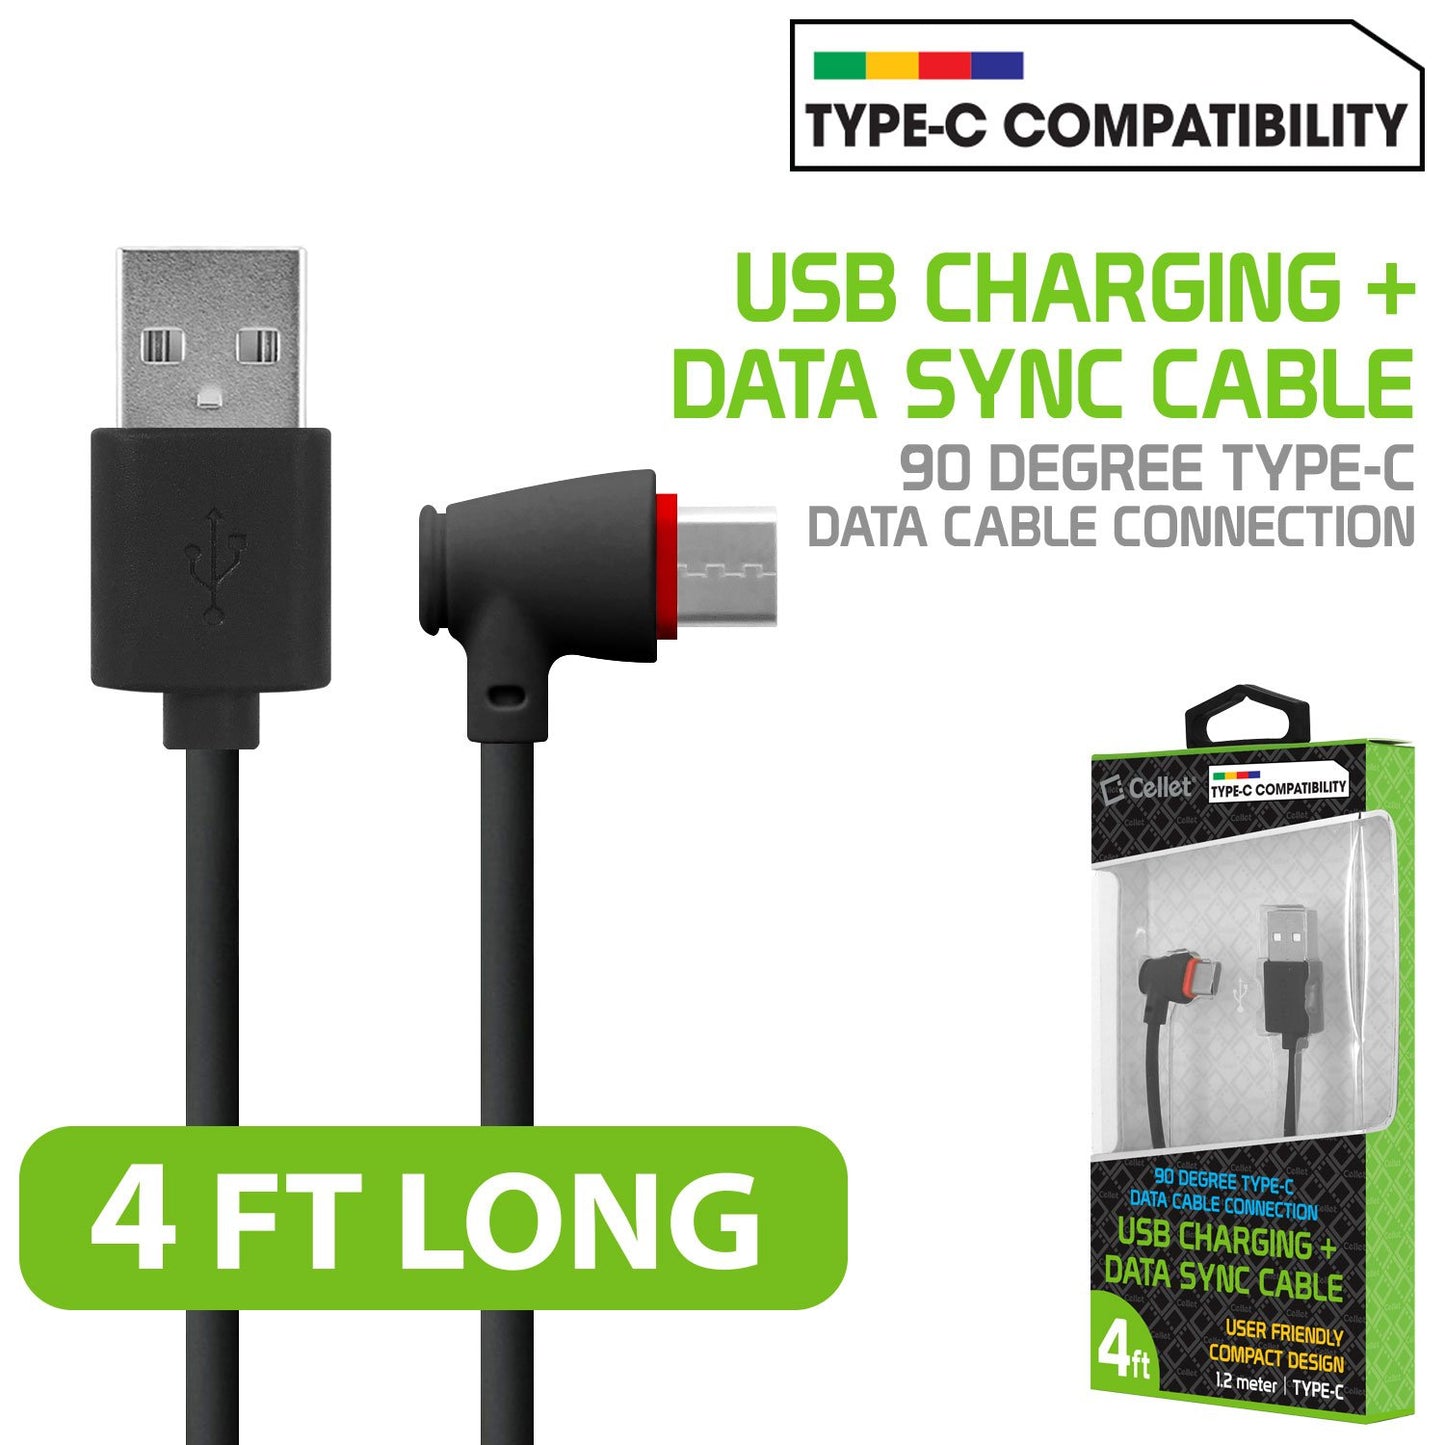 DCA904BK - USB C to USB-A Cable with 90 Degree Connector 4 Feet Charging & Data Sync Cable